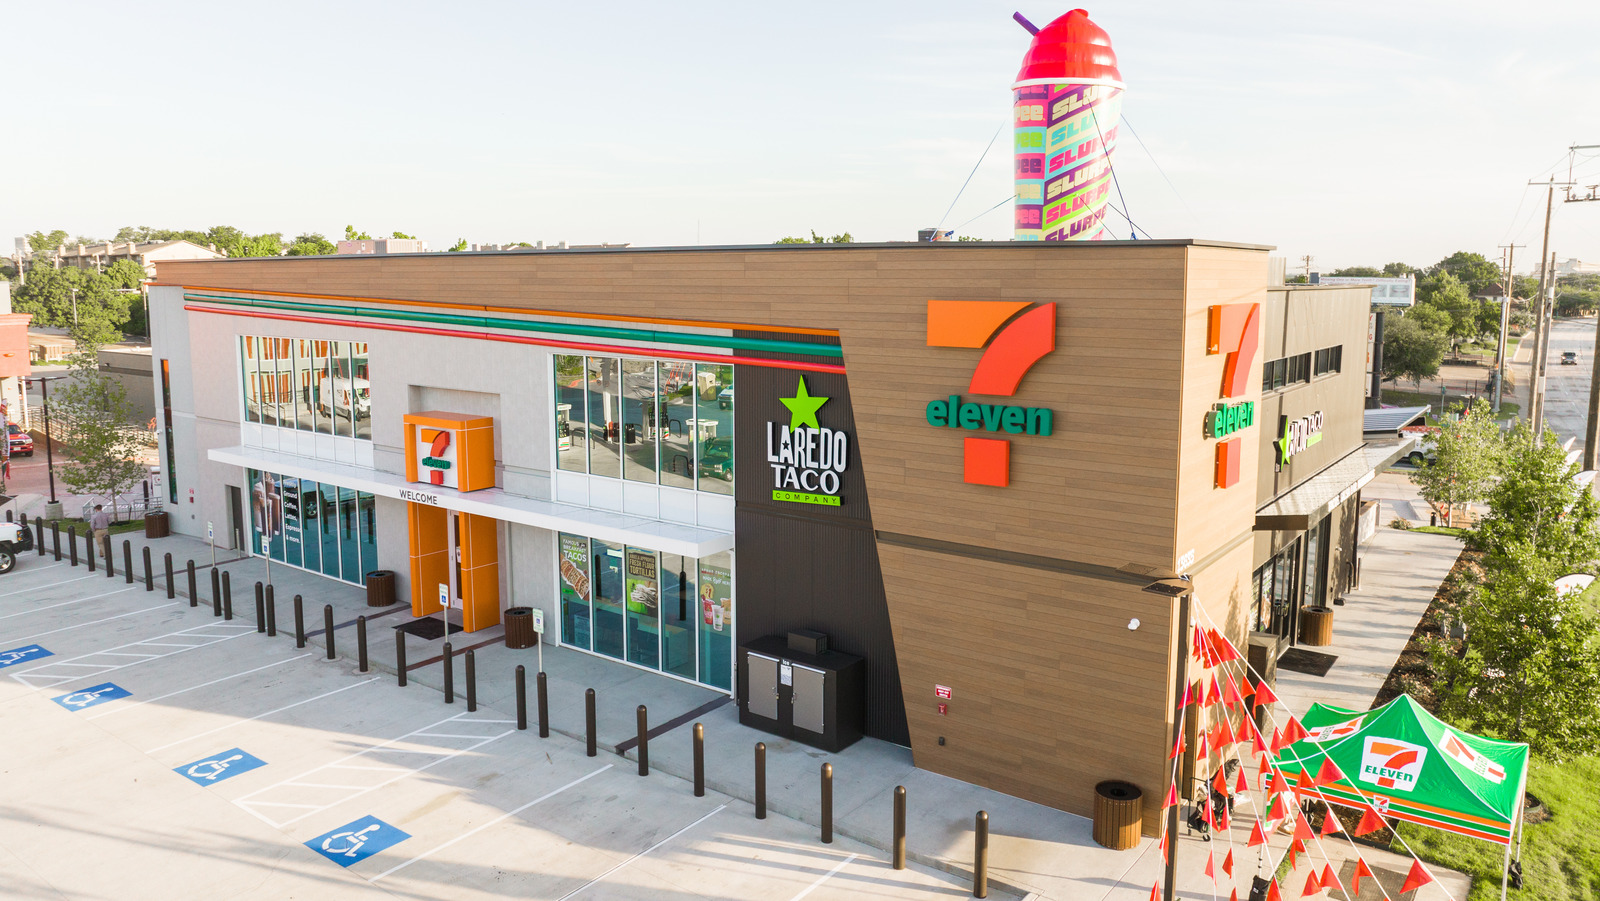 New Strategy Spells U.S. Expansion for 7-Eleven